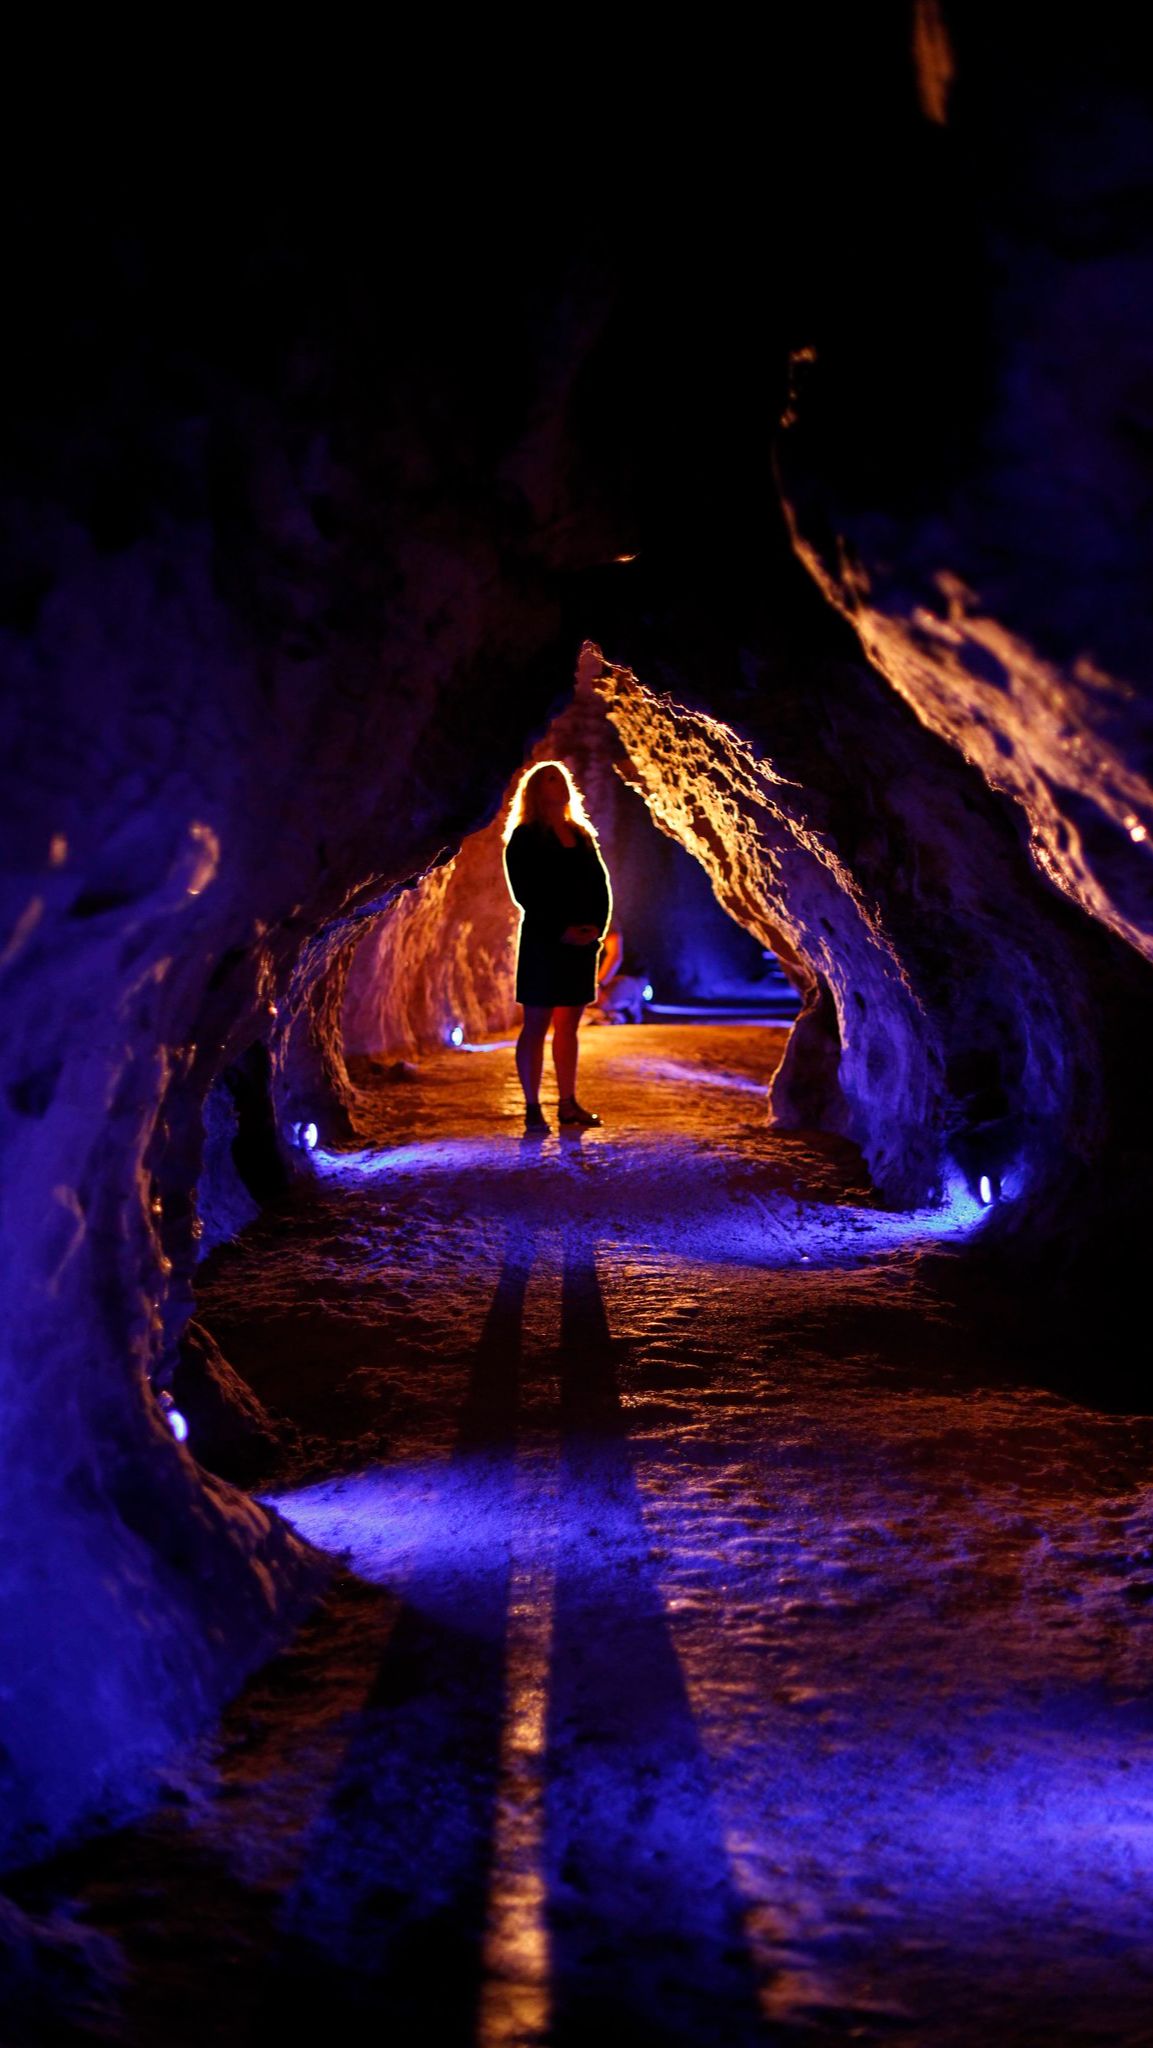 5. Waitomo Glowworm Caves: An Underground Starlit Realm<div><br></div><div>In the heart of New Zealand's North Island, the Waitomo Glowworm Caves present an unreal sensation. Thousands of bioluminescent glowworms illuminate the top of the caves.</div><div><br></div><div>Photo: flickr/Waitomo Glowworm Caves</div>